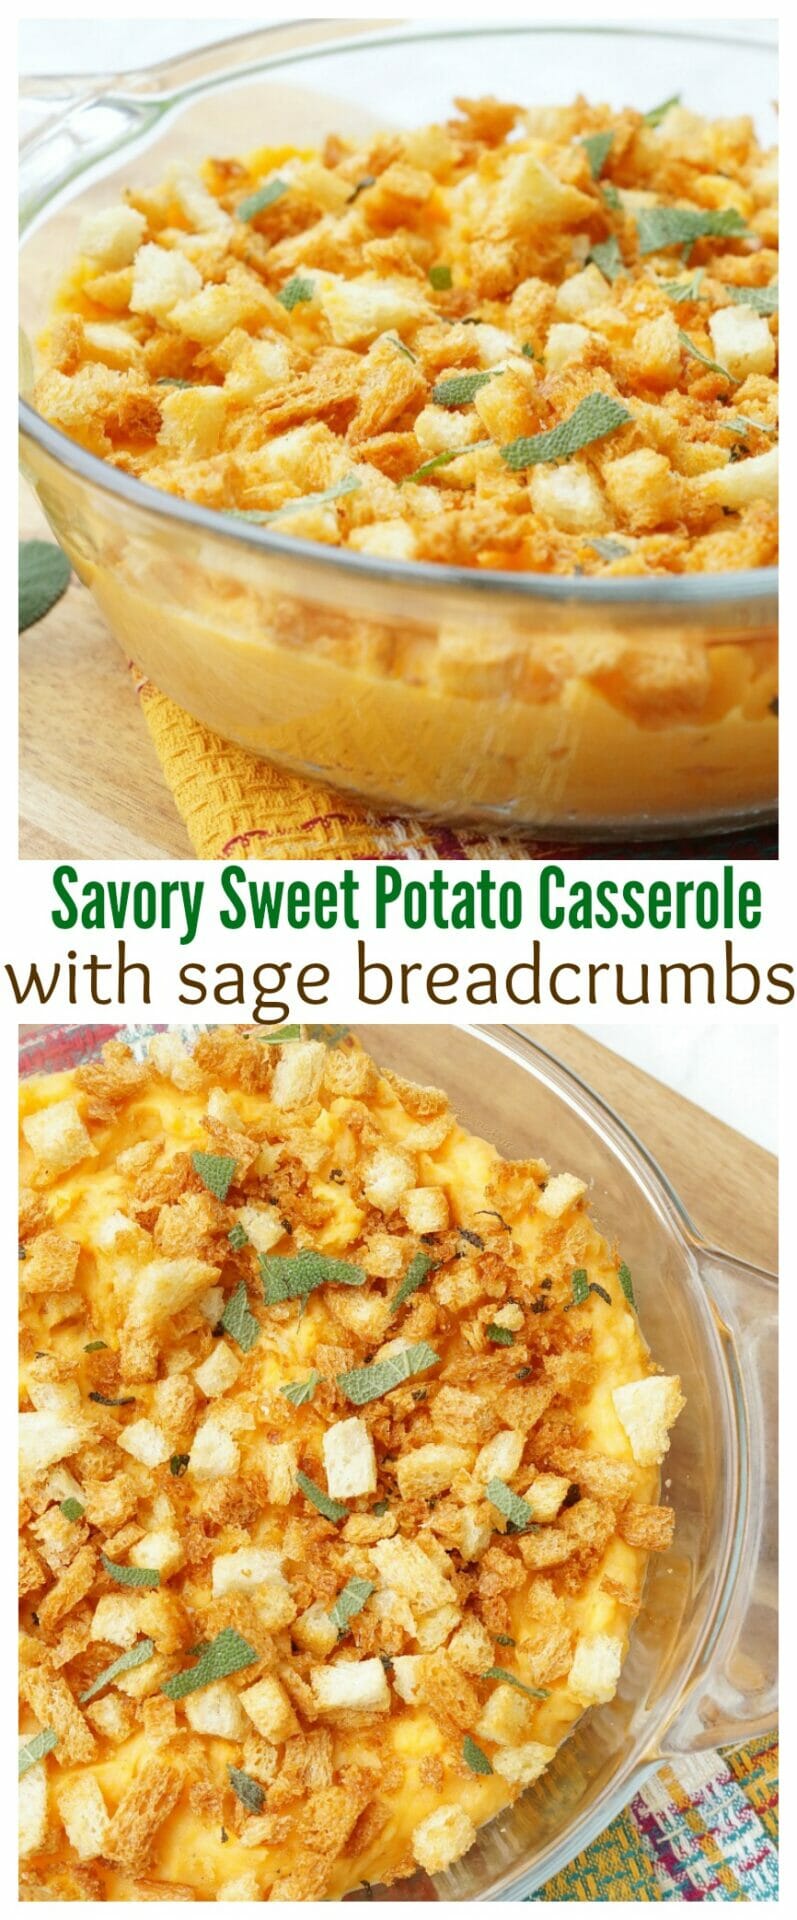 Savory Sweet Potato Casserole with Sage Breadcrumbs, an easy and delicious Thanksgiving side dish recipe